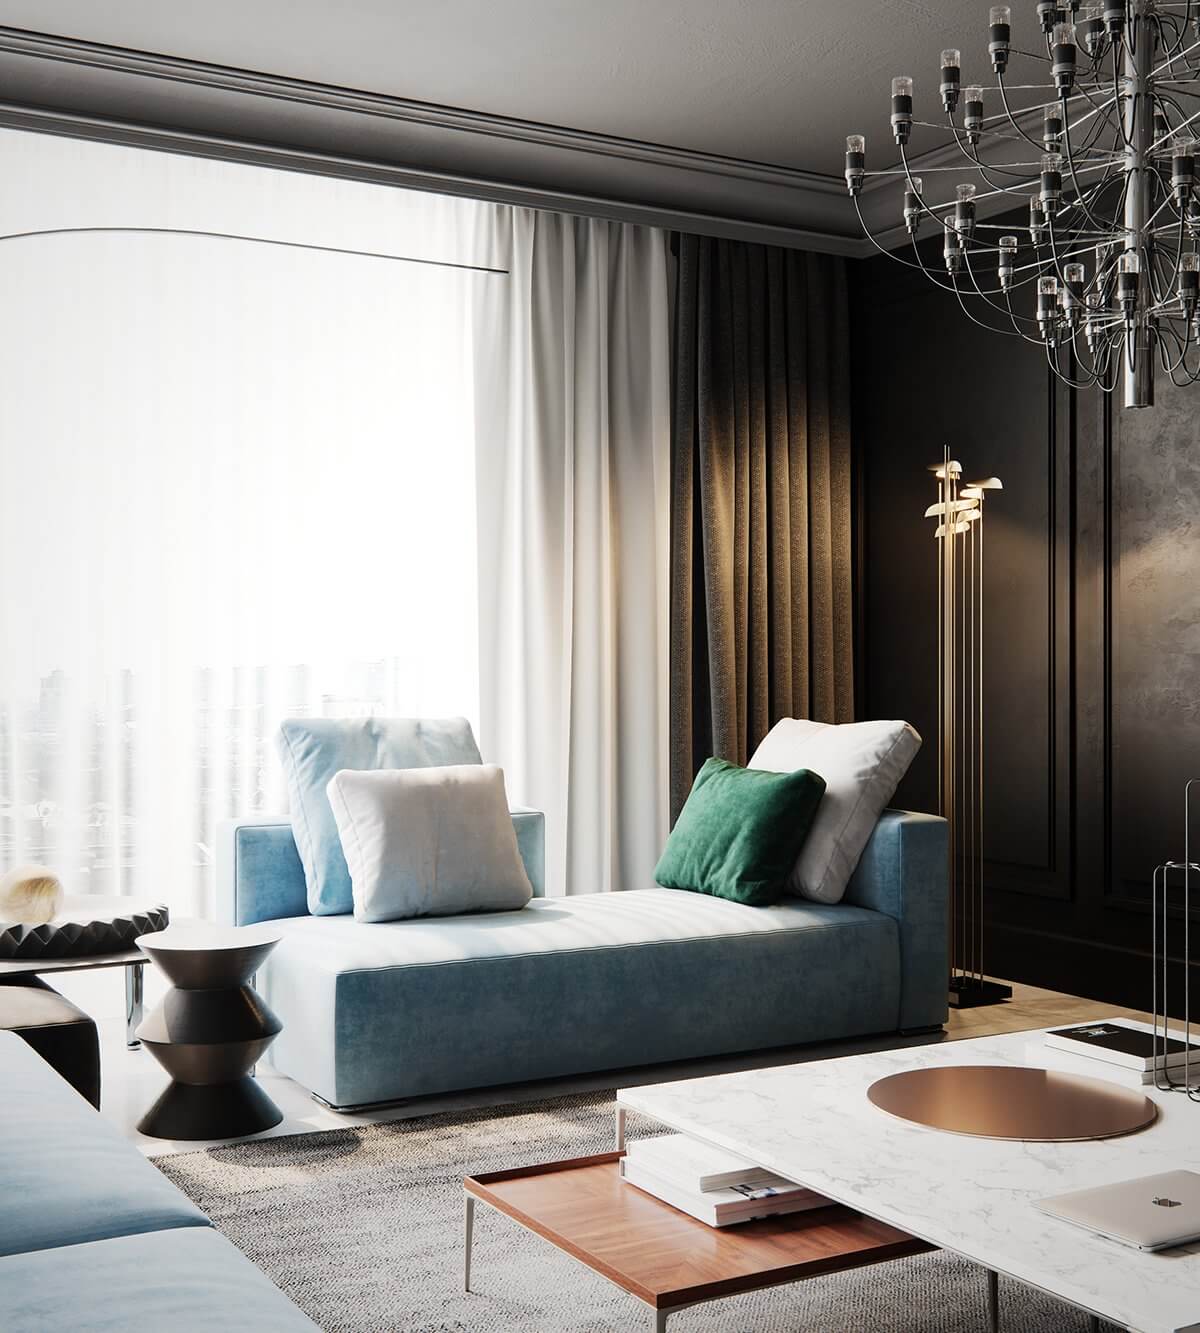 Moscow apartment living room couch 2 - cgi visualization